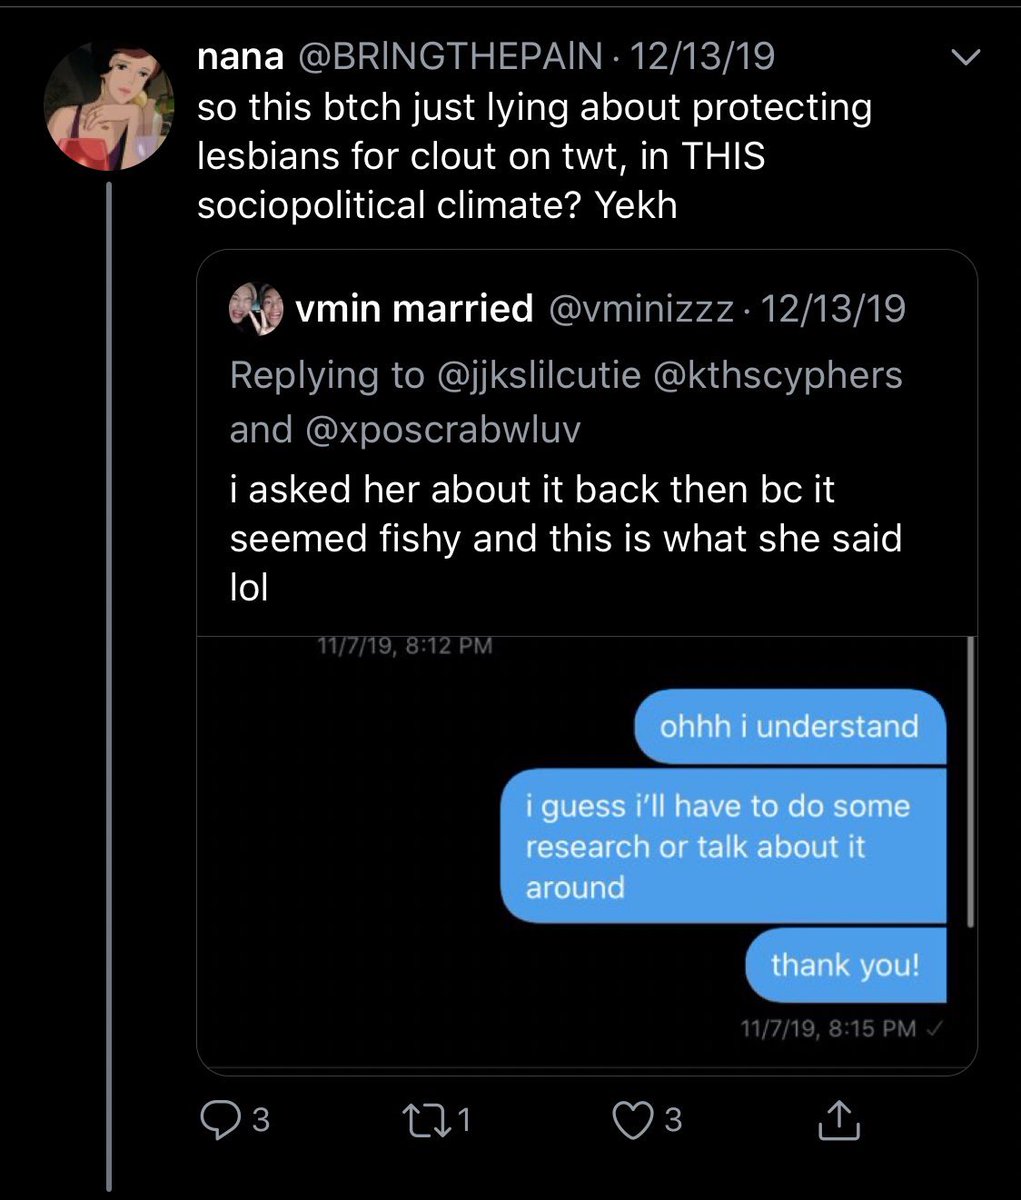 Everyone talking about her law degree, here’s the case where she supposedly defended two lesbians. Very sure it’s made up and she isn’t a lawyer. Notice she claims she won a case, but in replies to someone else says it was training  lying about defending lesbians for clout